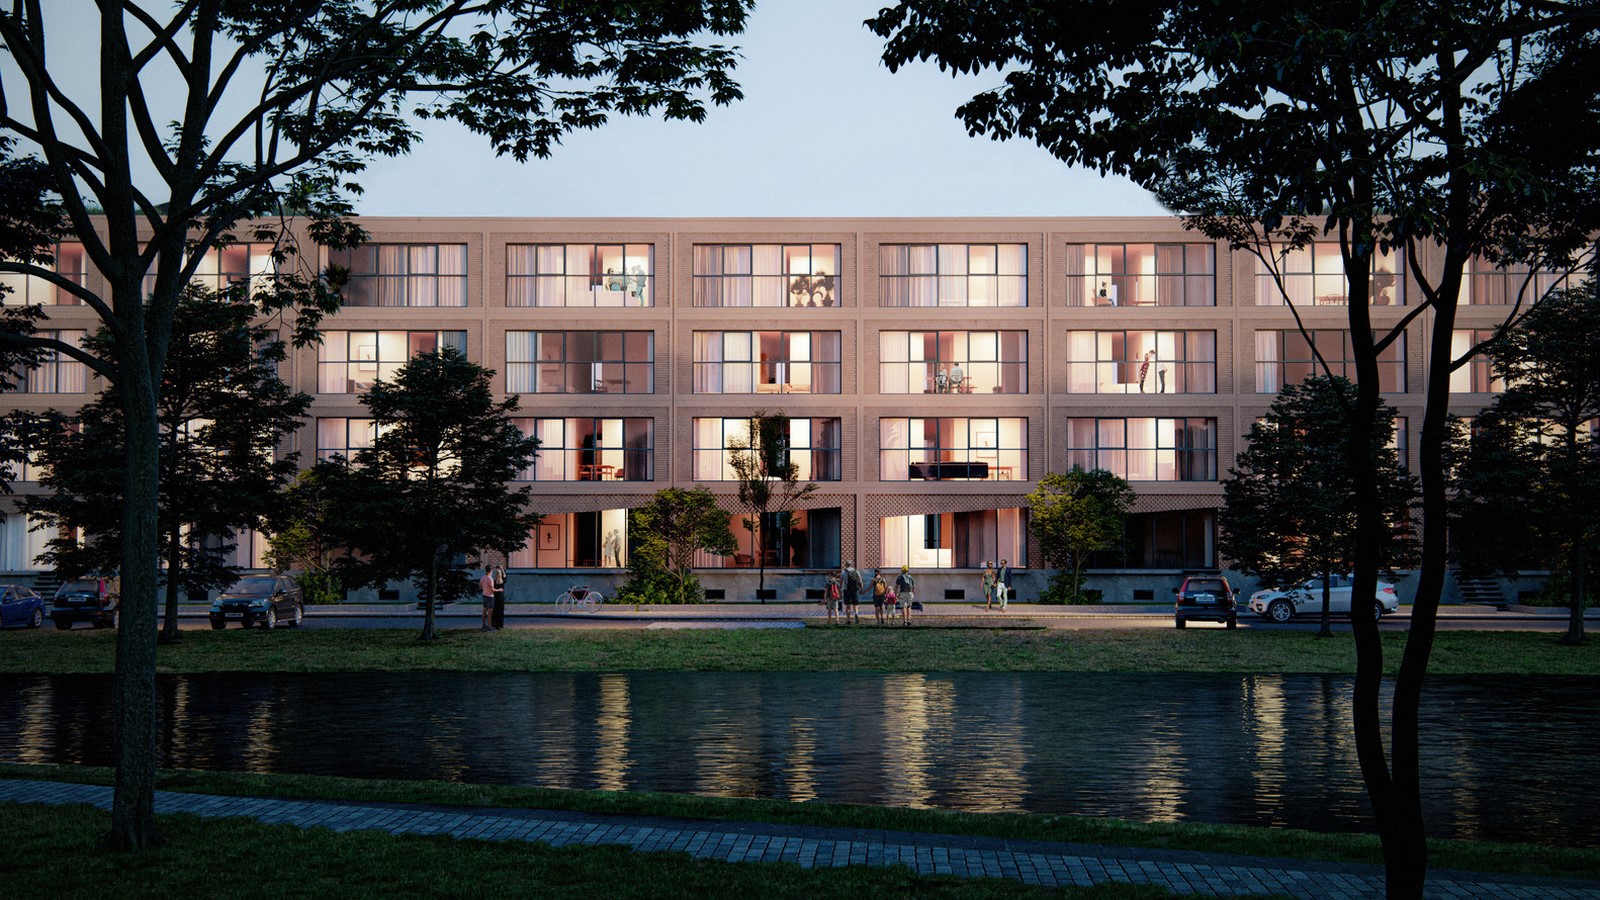 Modular timber system to create Affordable housing in Rotterdam designed by HA- HA - Sheet1